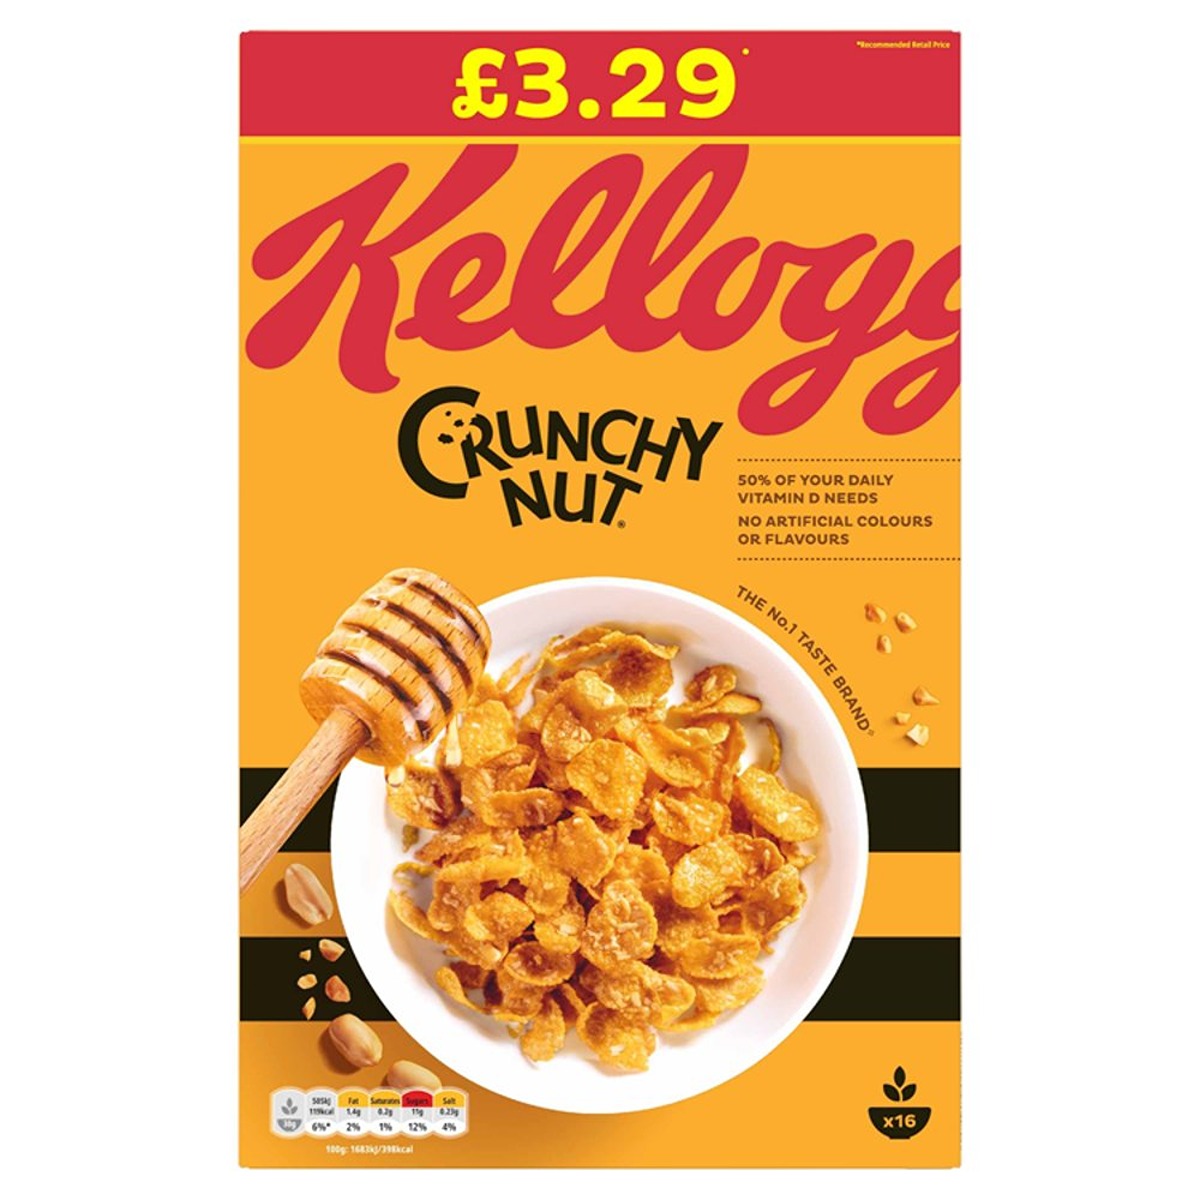 Kellogg's - Crunchy Nut Cereal - 500g - Continental Food Store